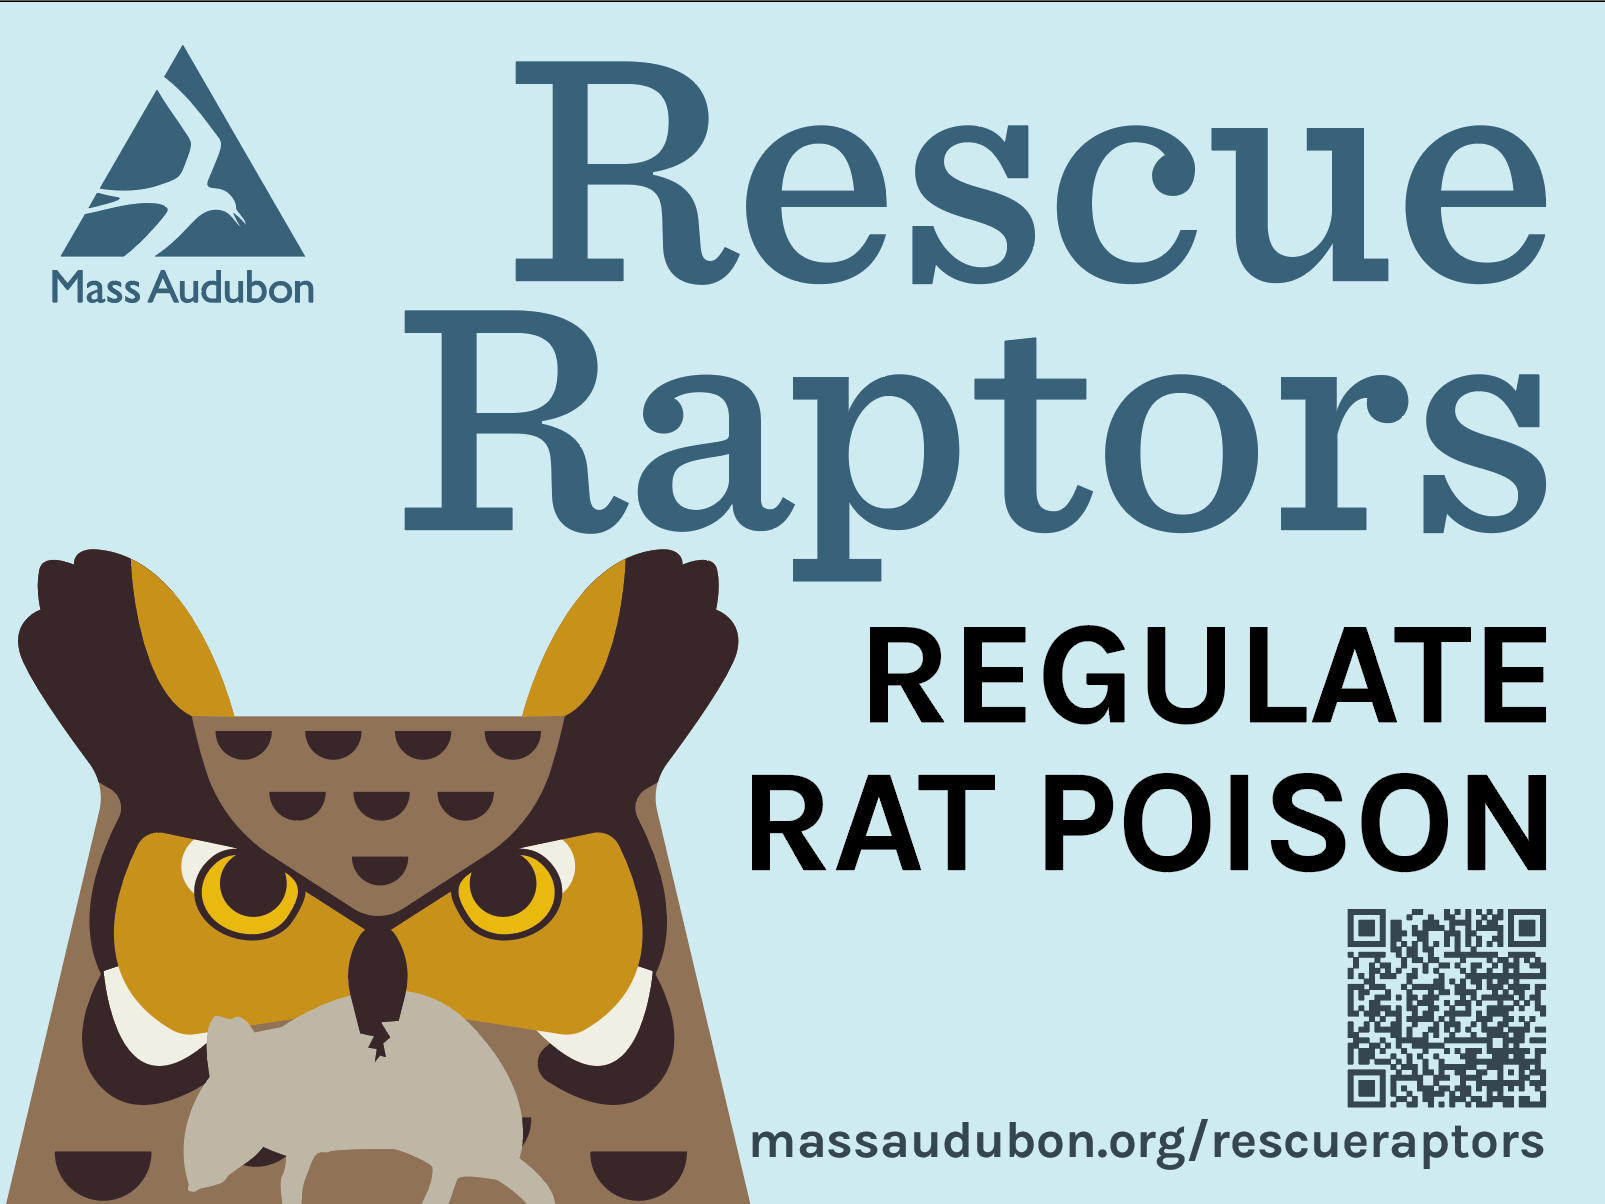 A sign that reads "Rescue Raptors, Regulate Rat Poison" with a picture of an owl holding a rat in is beak